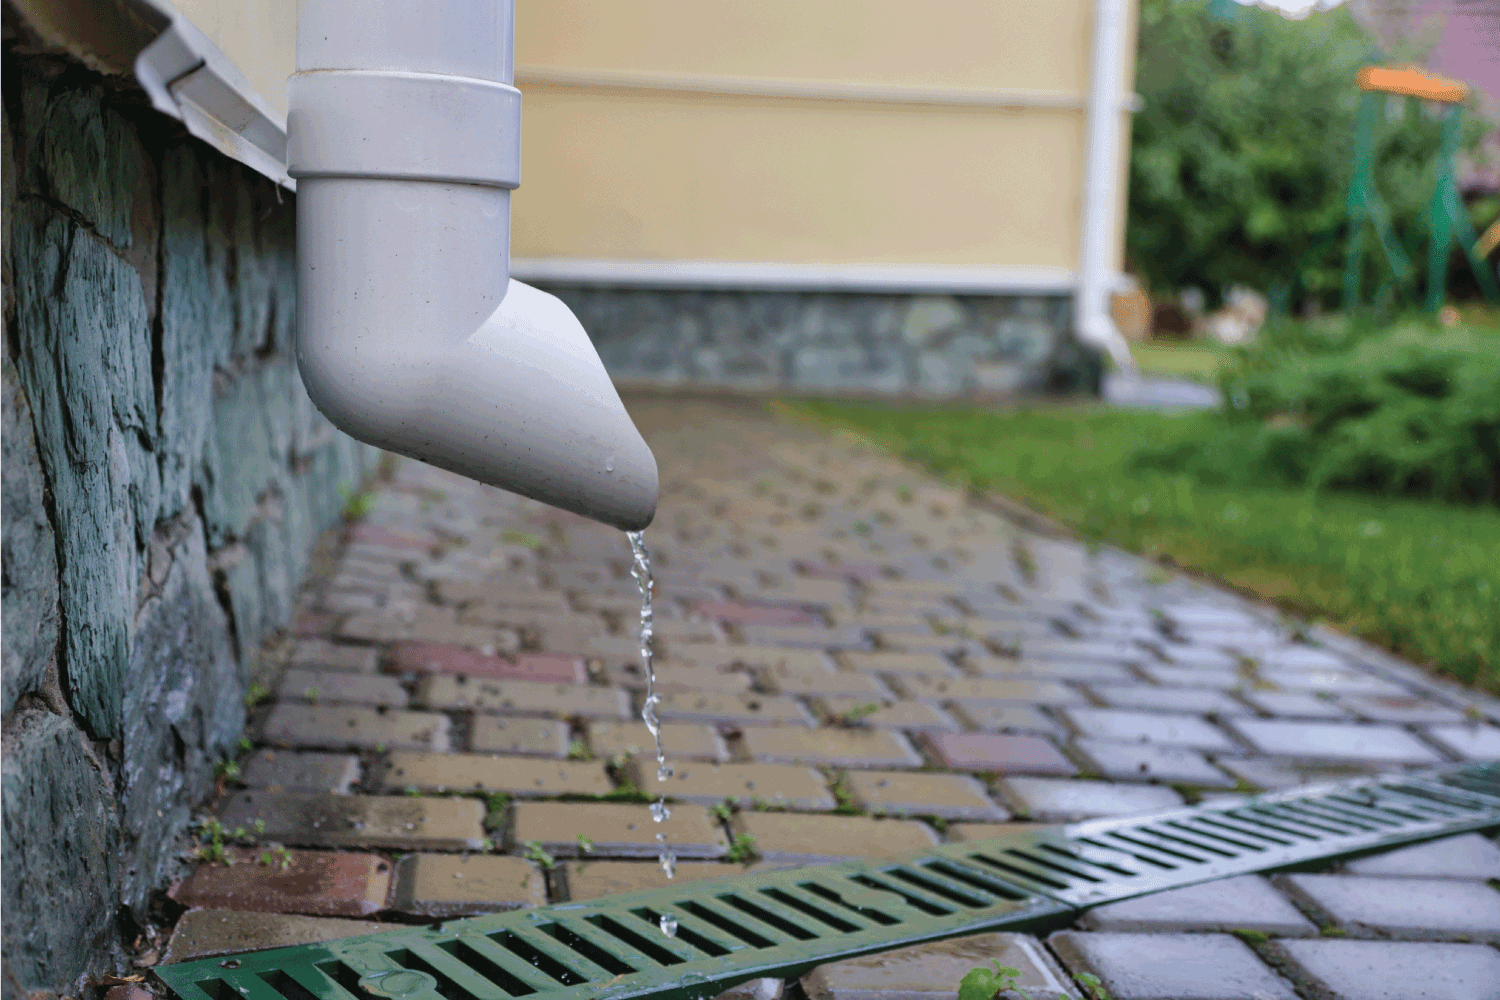 water flows down a white drainpipe of a beige house into a gutter with a grate